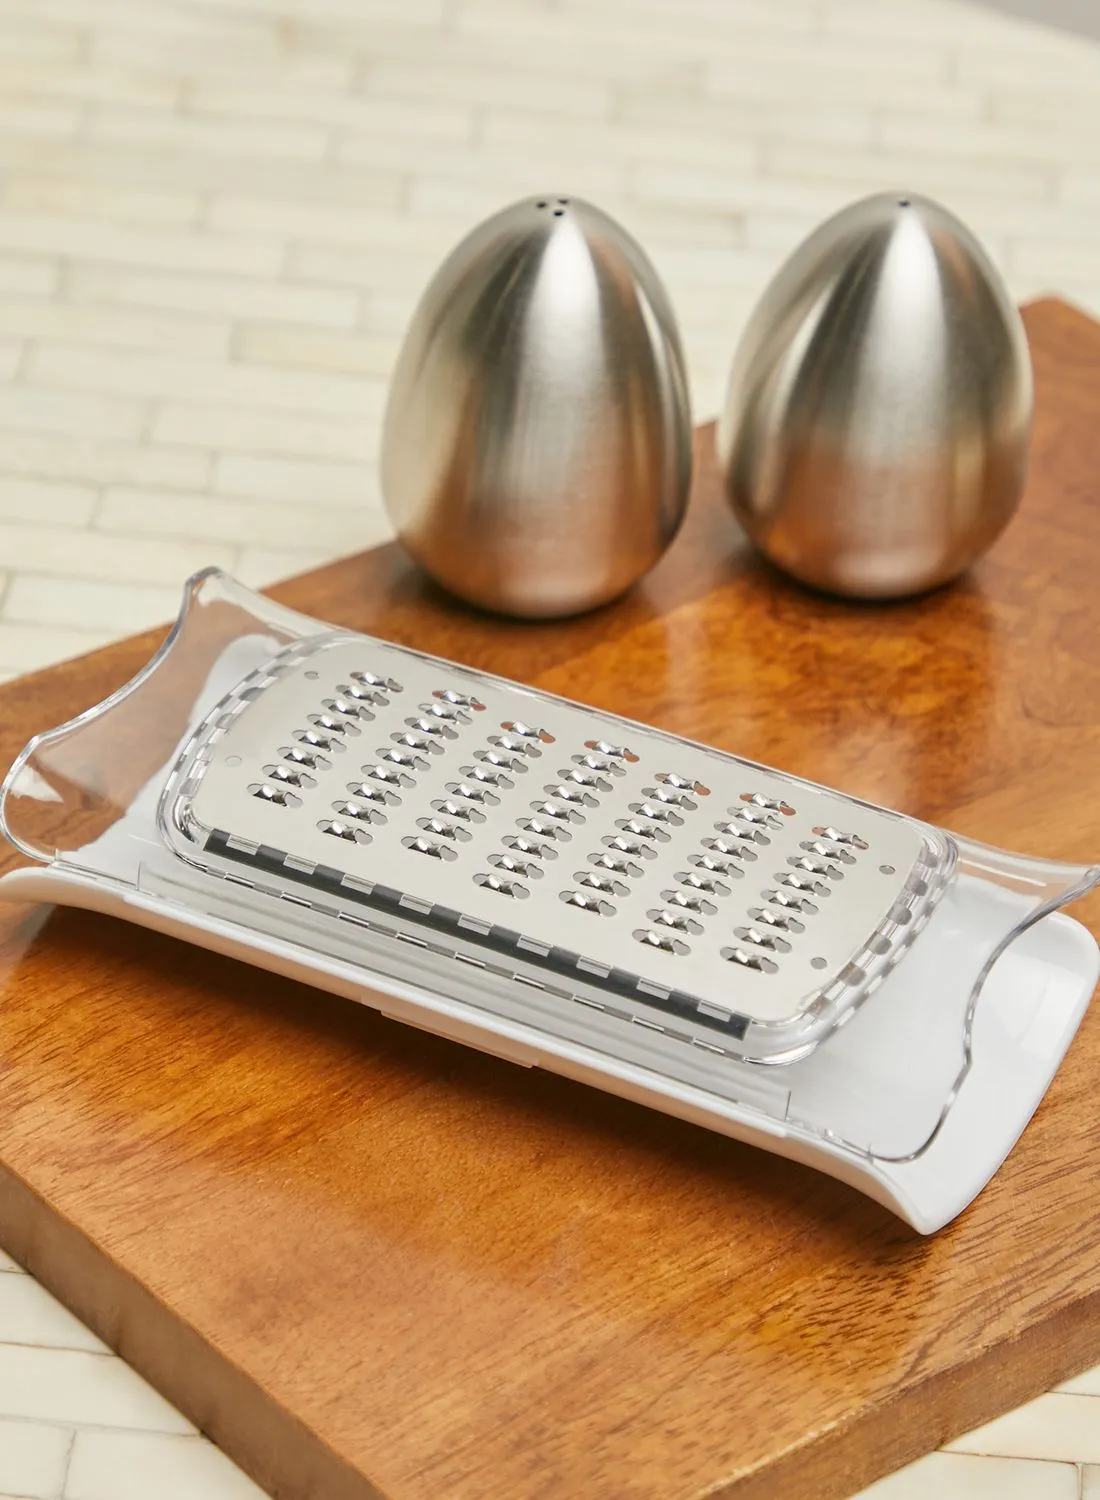 Premier Stainless Steel Cheese Grater